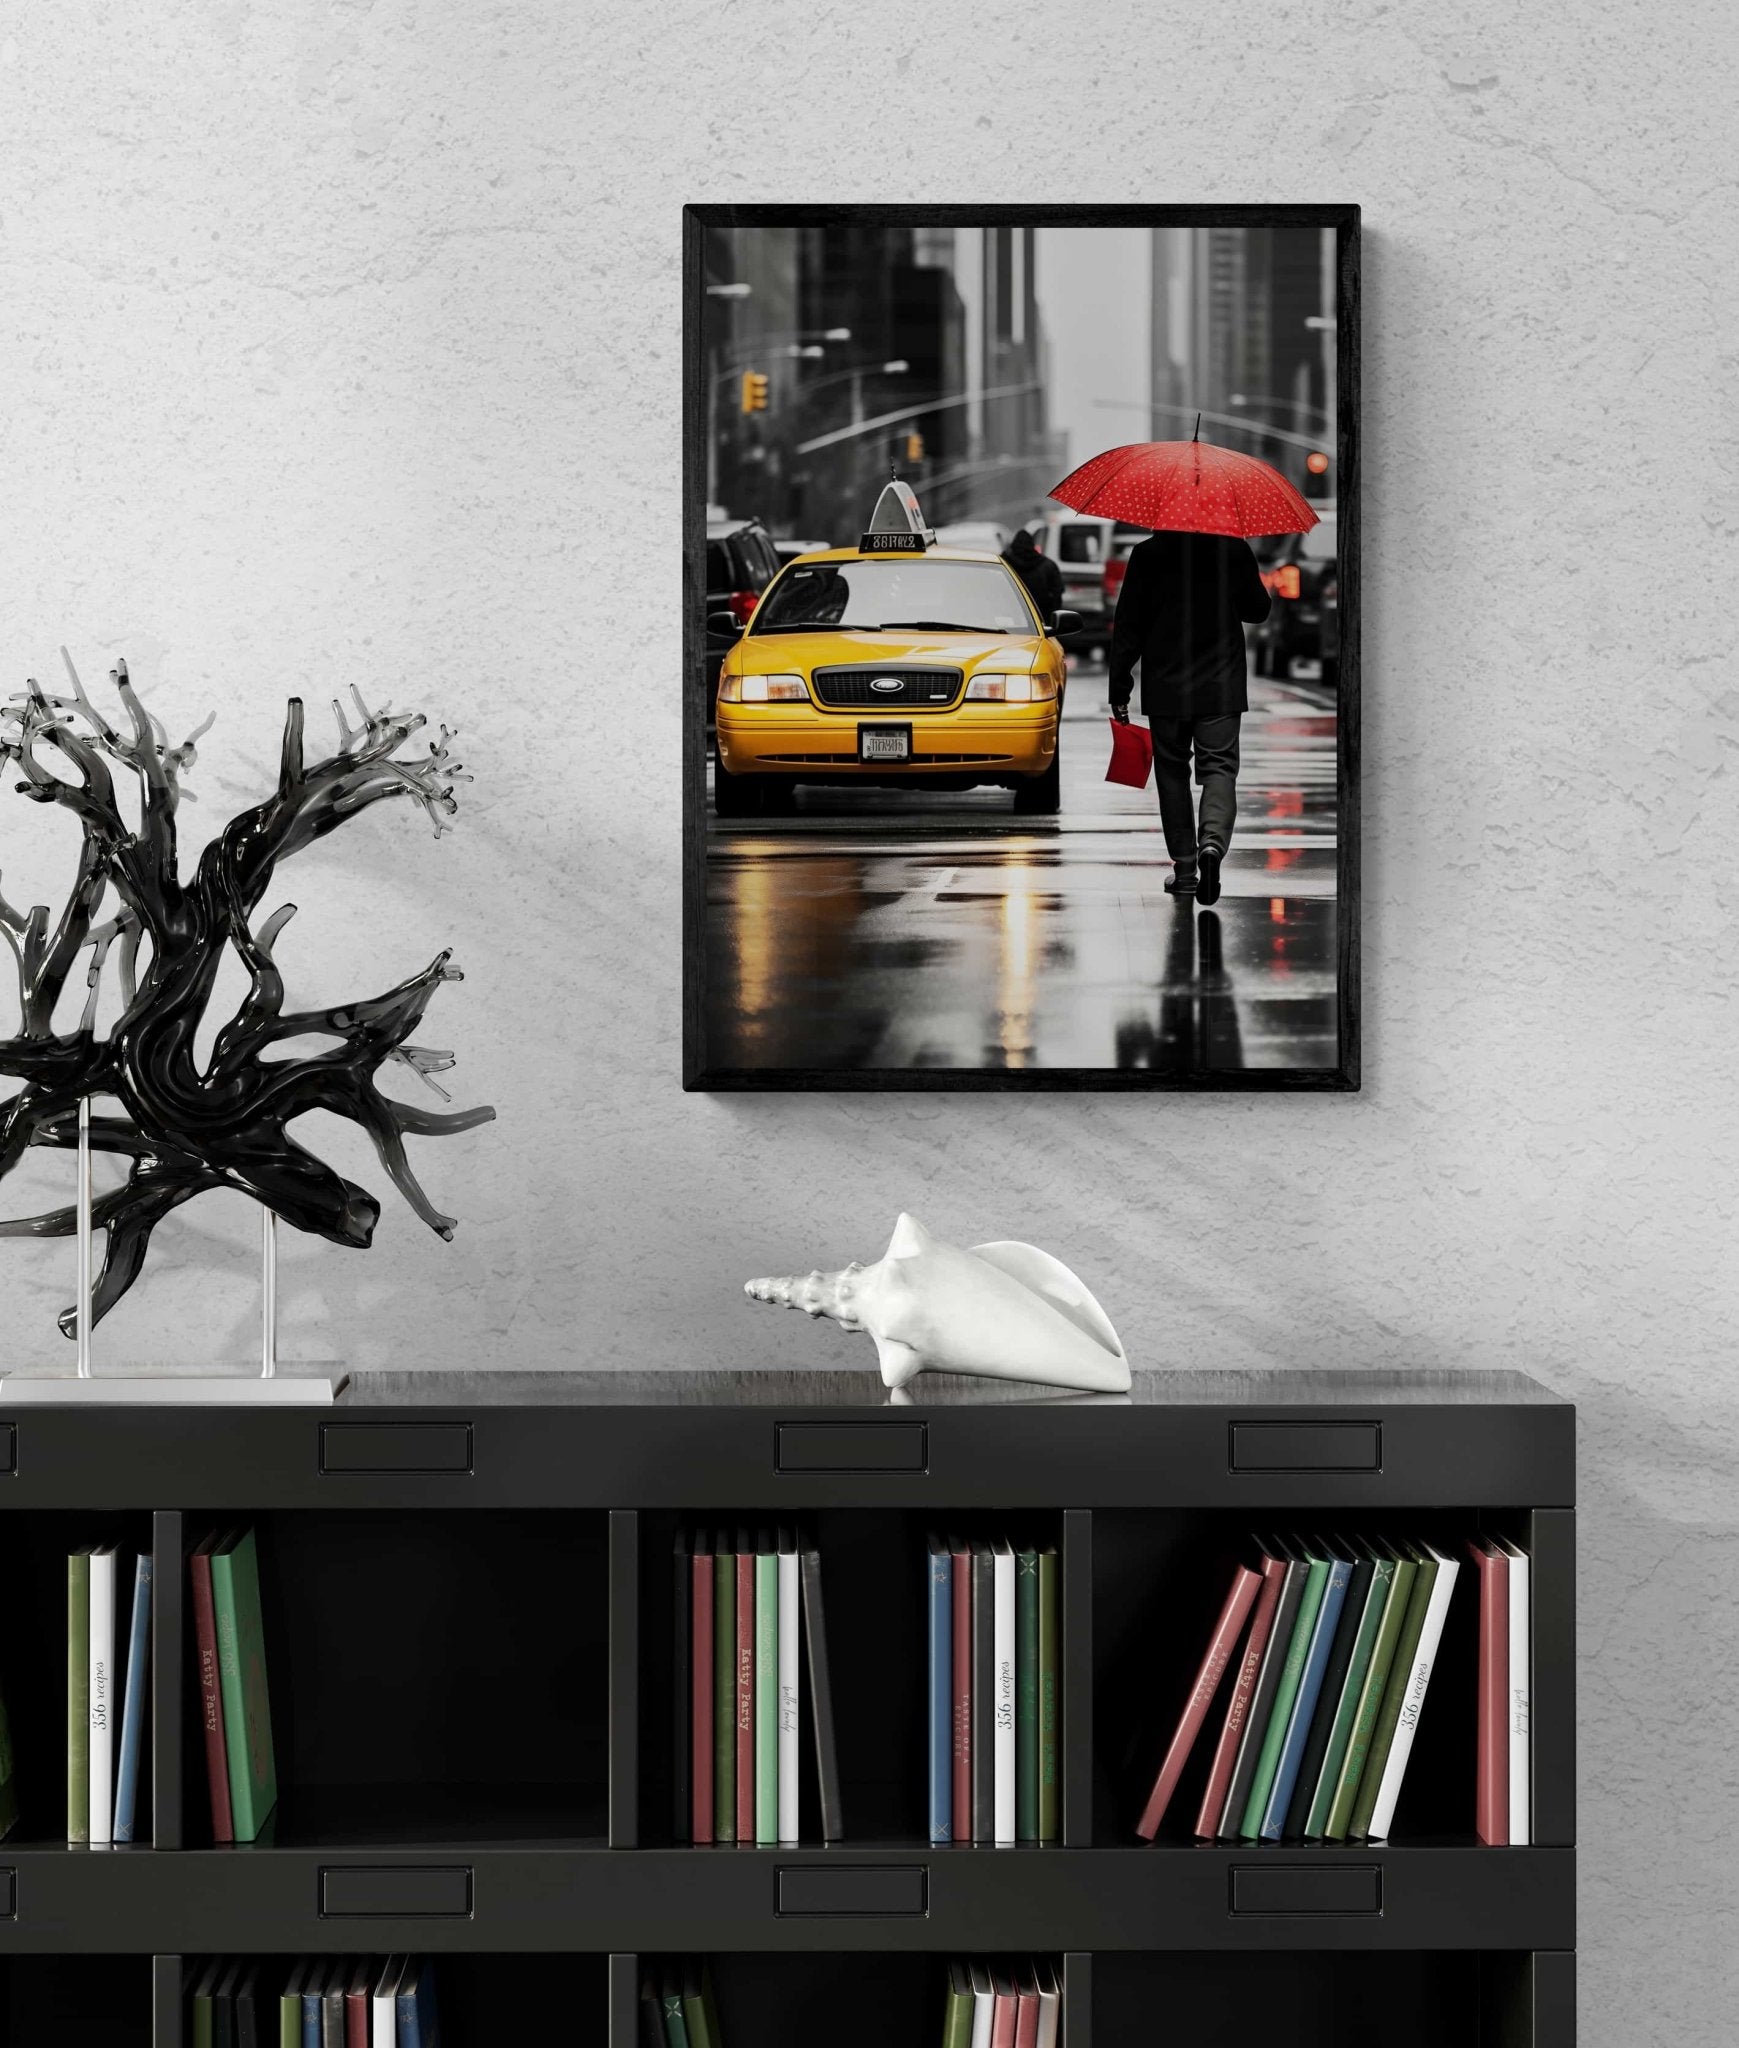 Iconic NYC Rainy Day - Framed Black & White Photography Print - Milton Wes Art Posters, Prints, & Visual Artwork